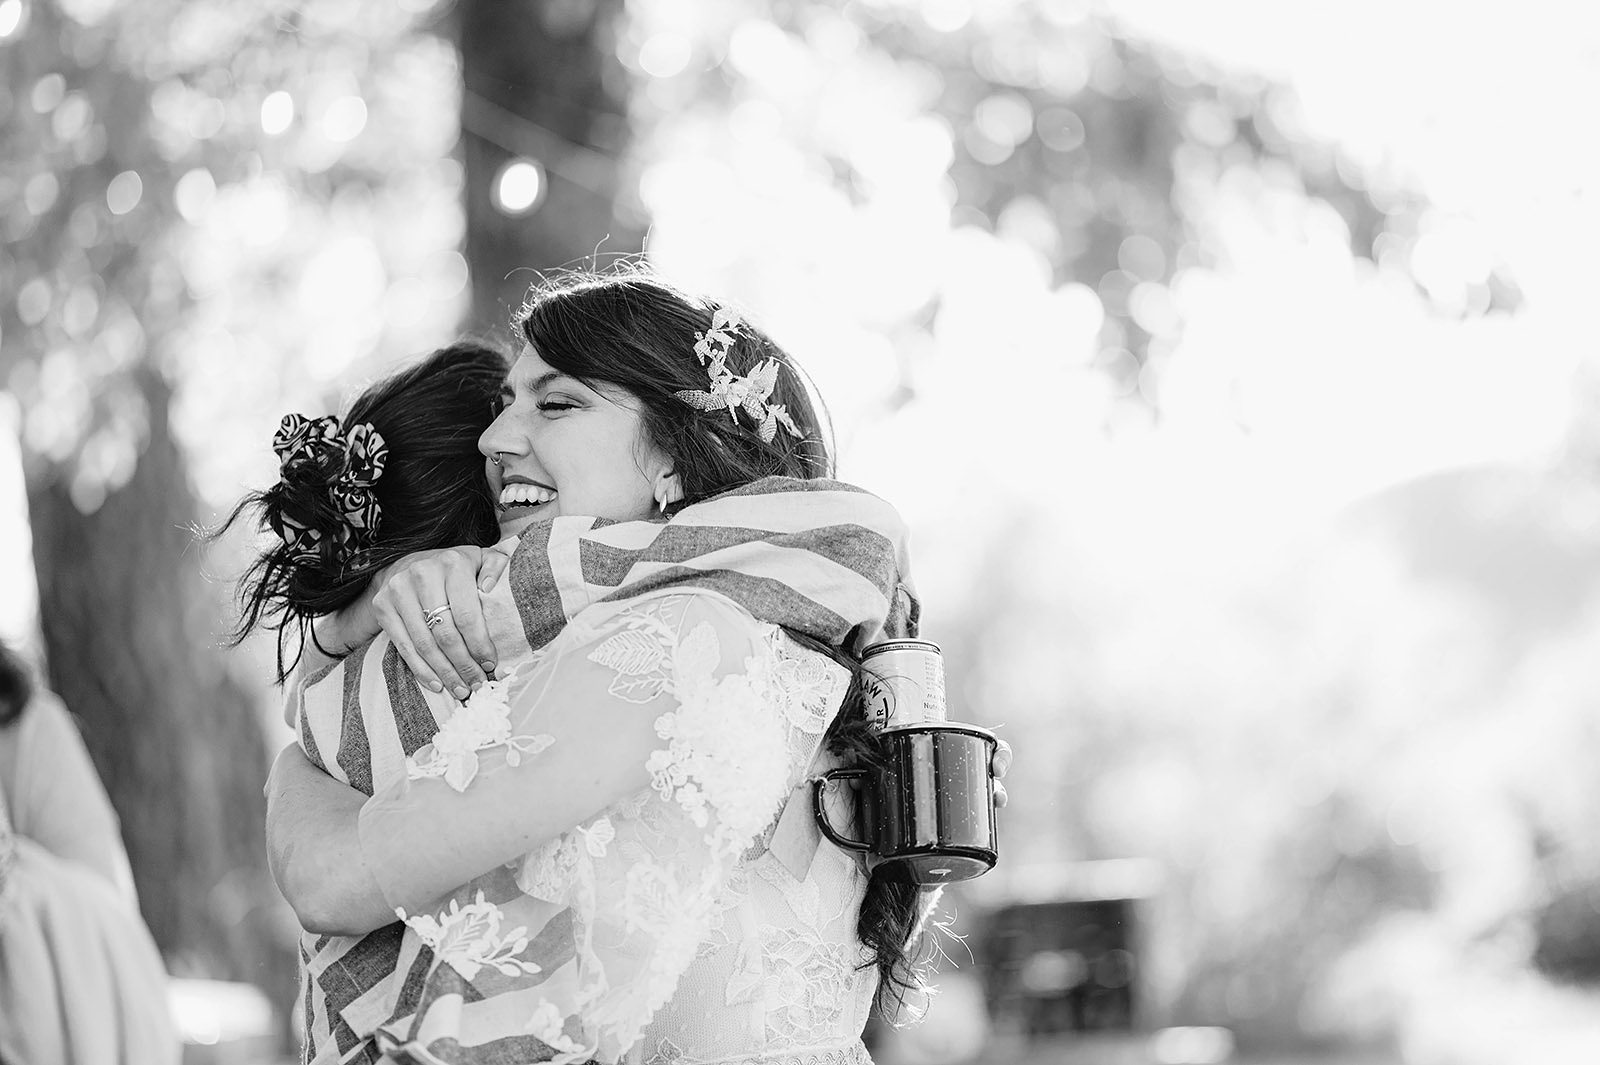 Bride smiling while hugging a friend at the reception - Trout Lake Wedding, WA